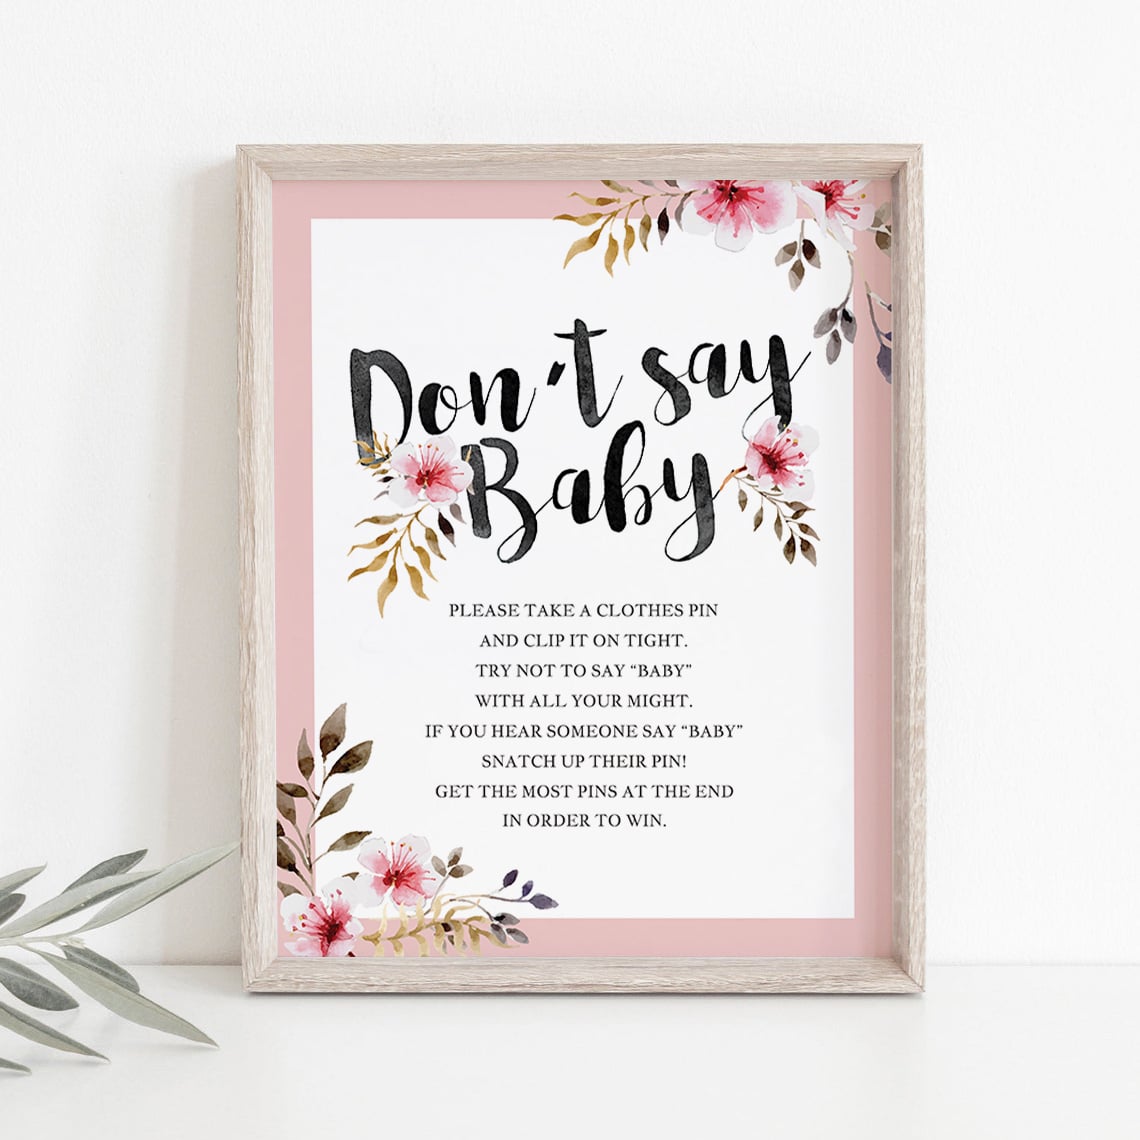 Do not say baby at baby shower game printable table top sign by LittleSizzle